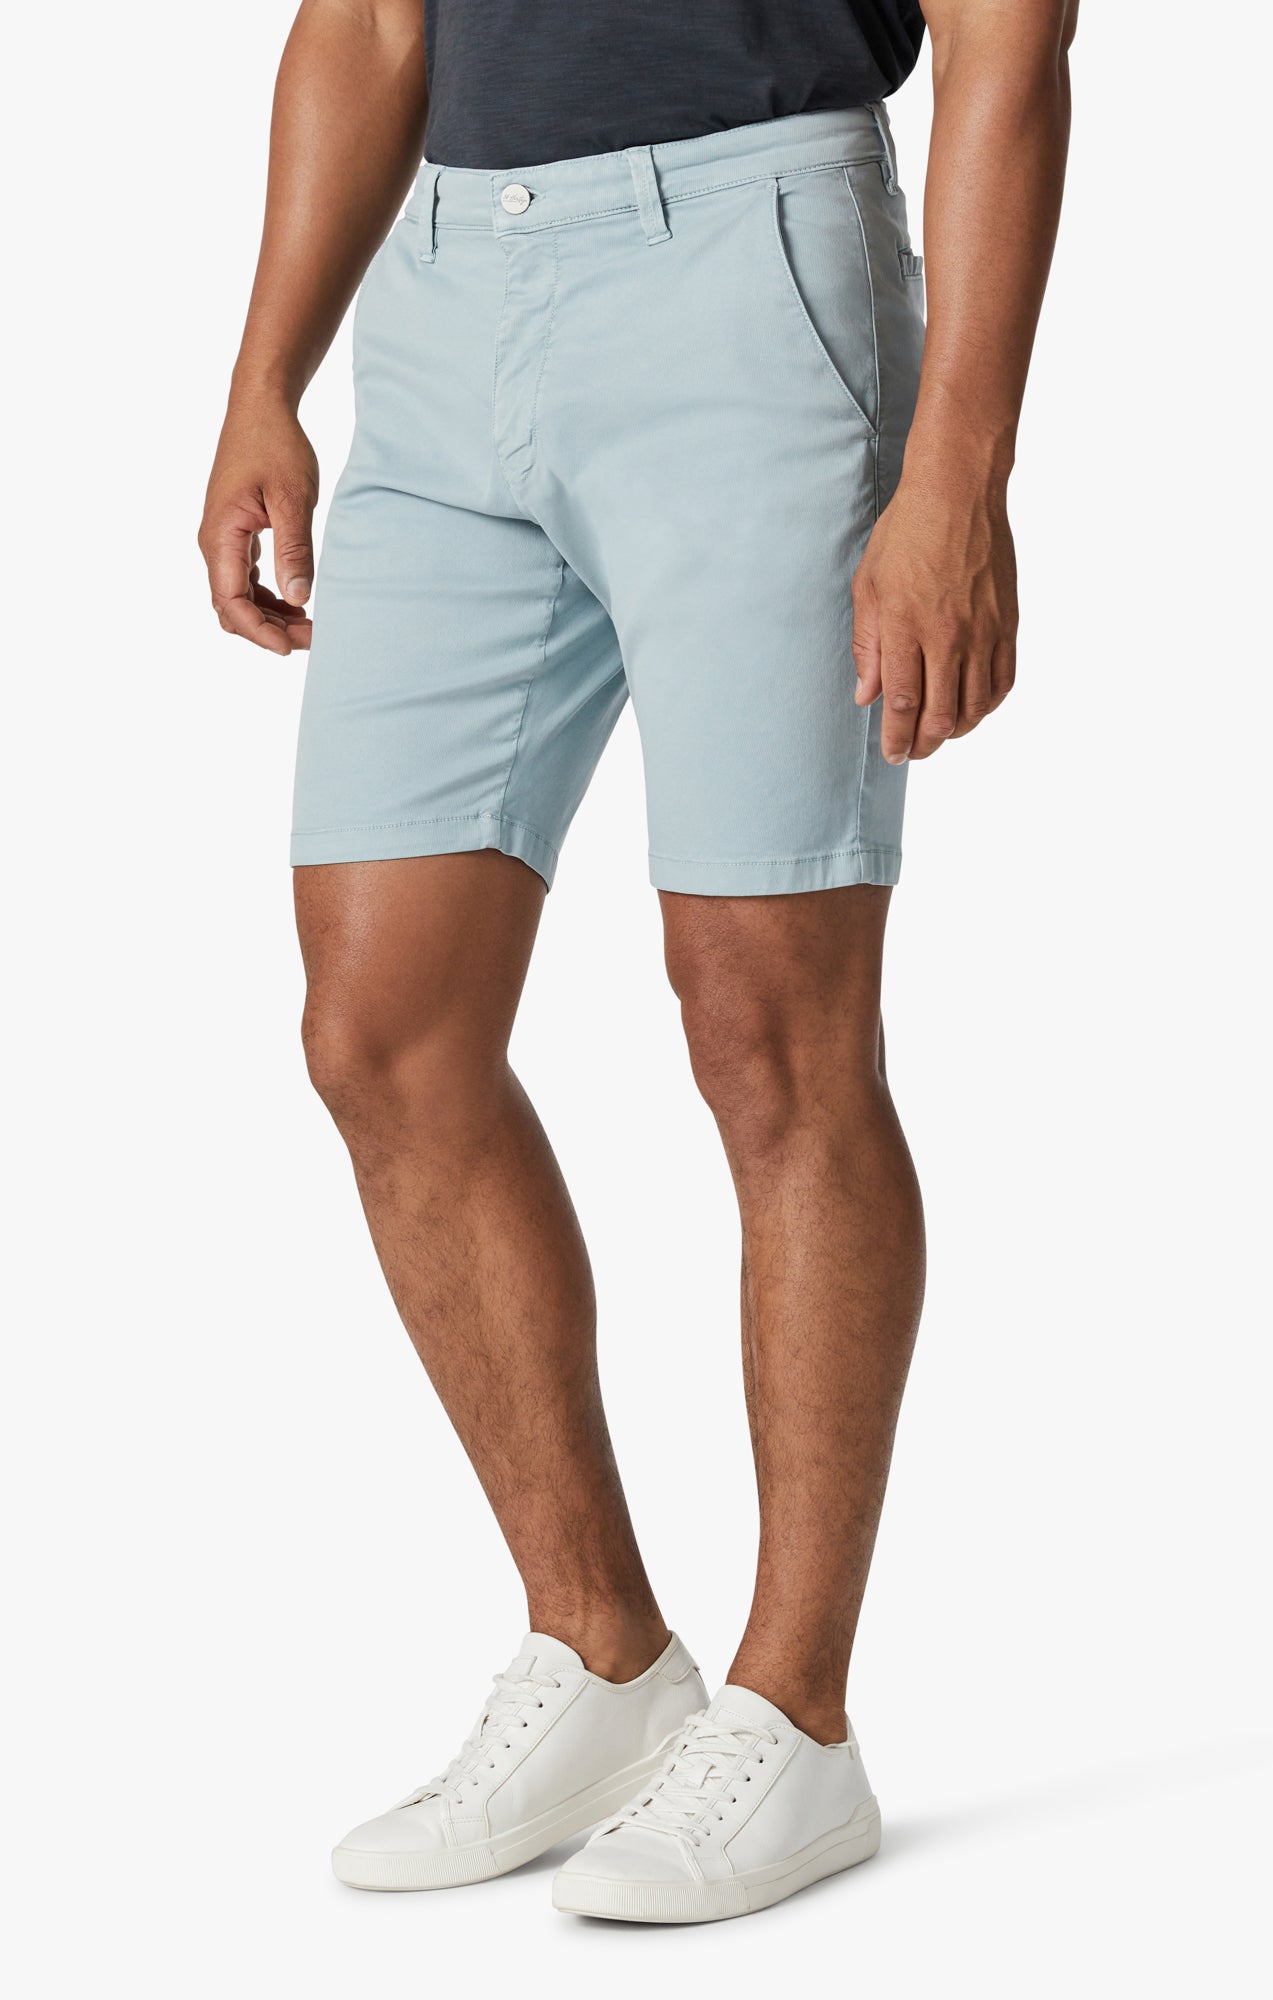 Arizona Shorts In Light Blue Soft Touch Image 3